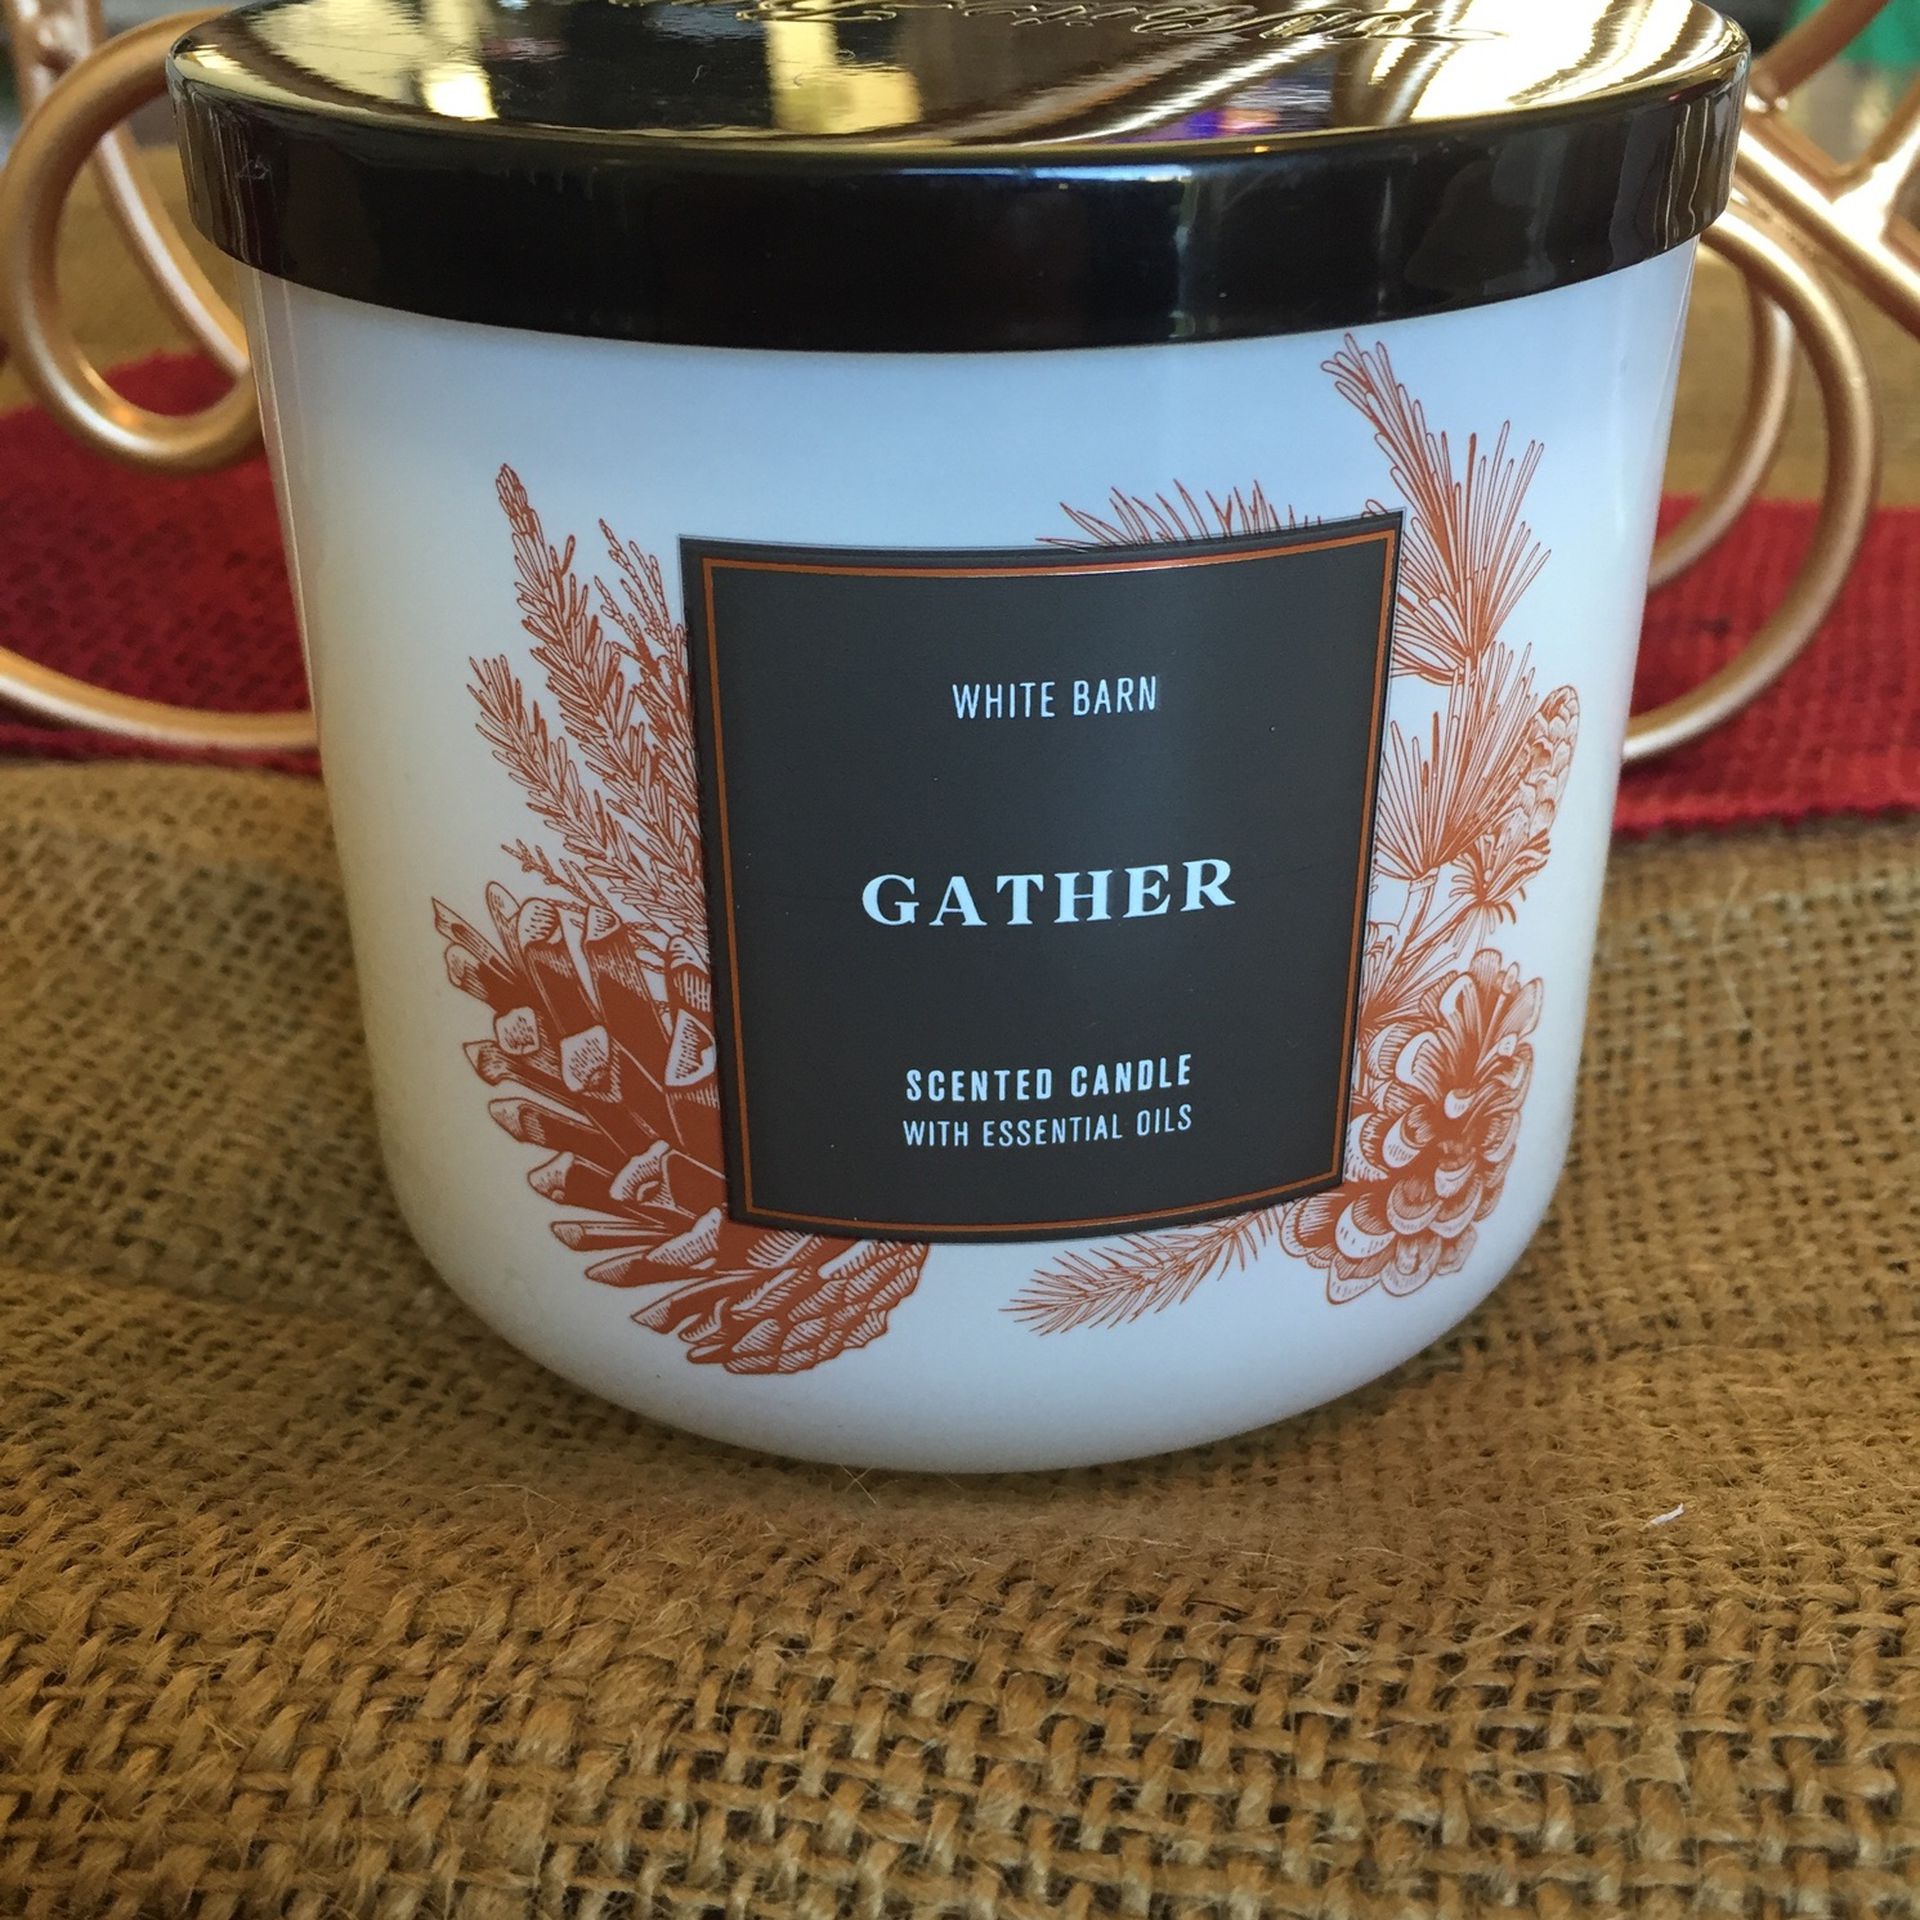 White Barn “Gather” Scented Candle